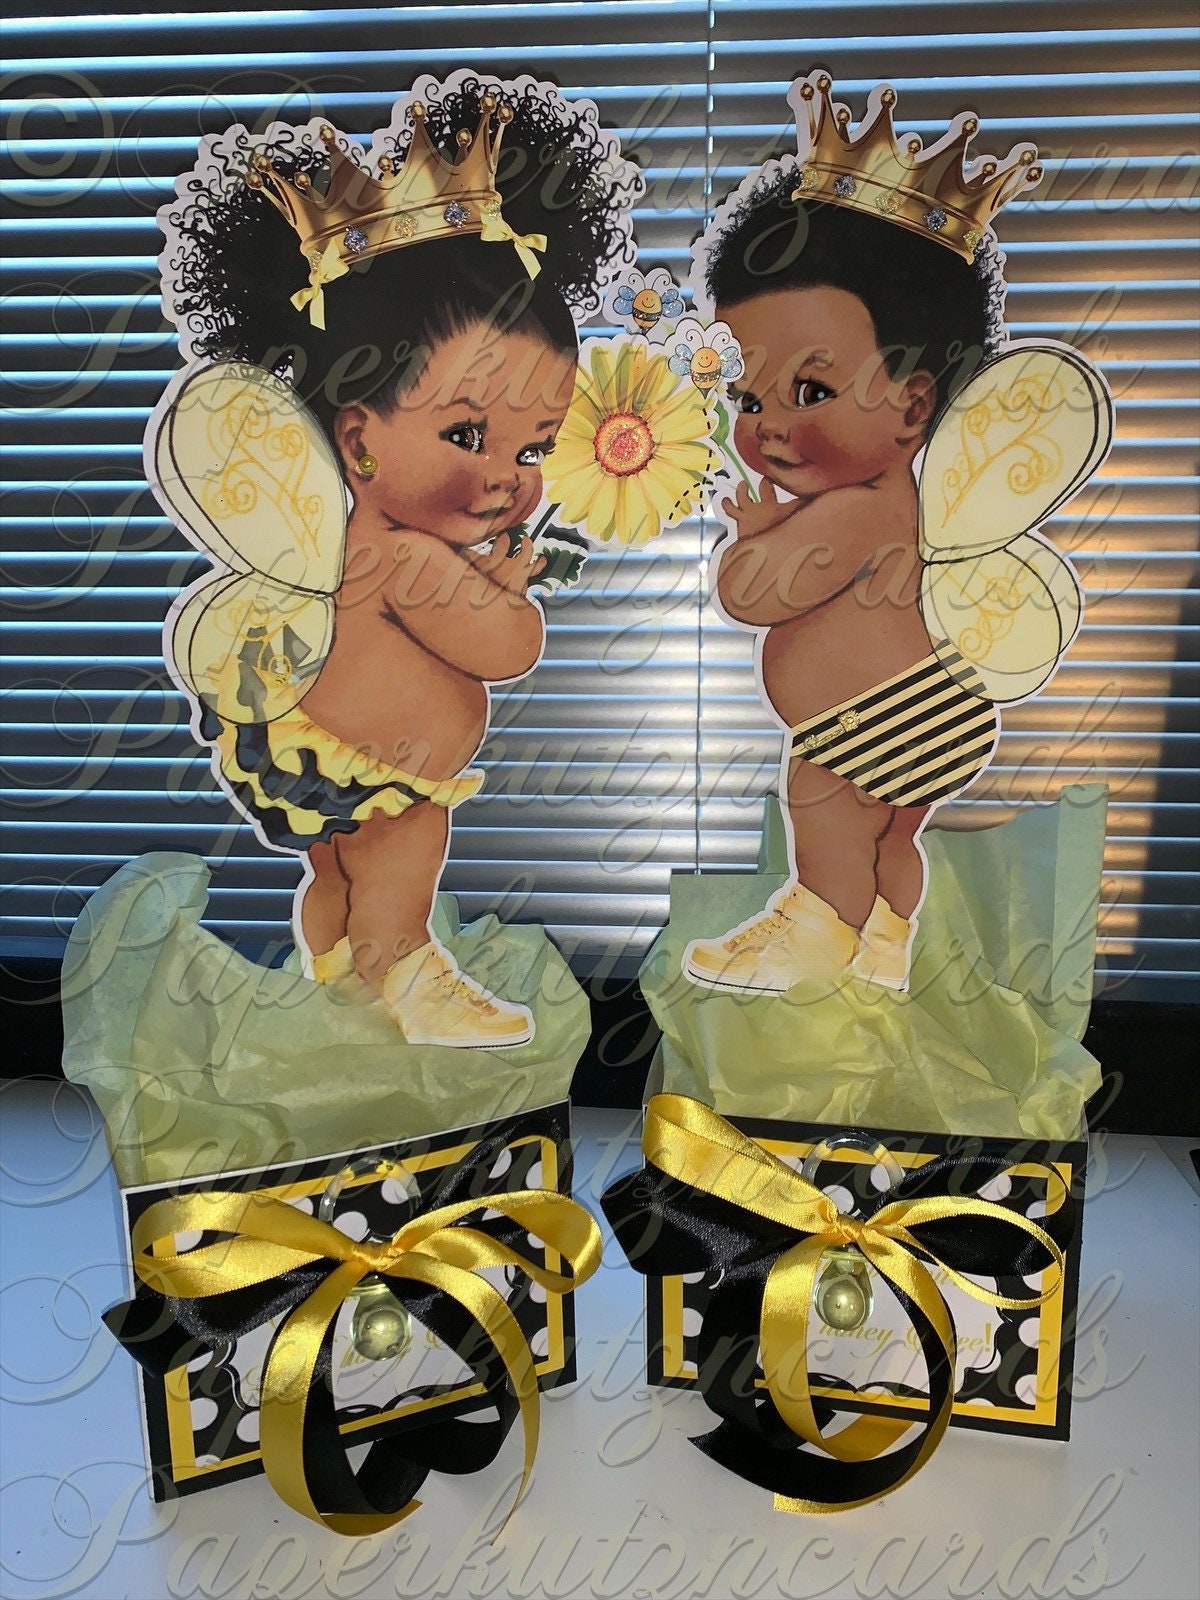 Bumble Bee Baby Shower Centerpiece, 6 inch, set of 8 –